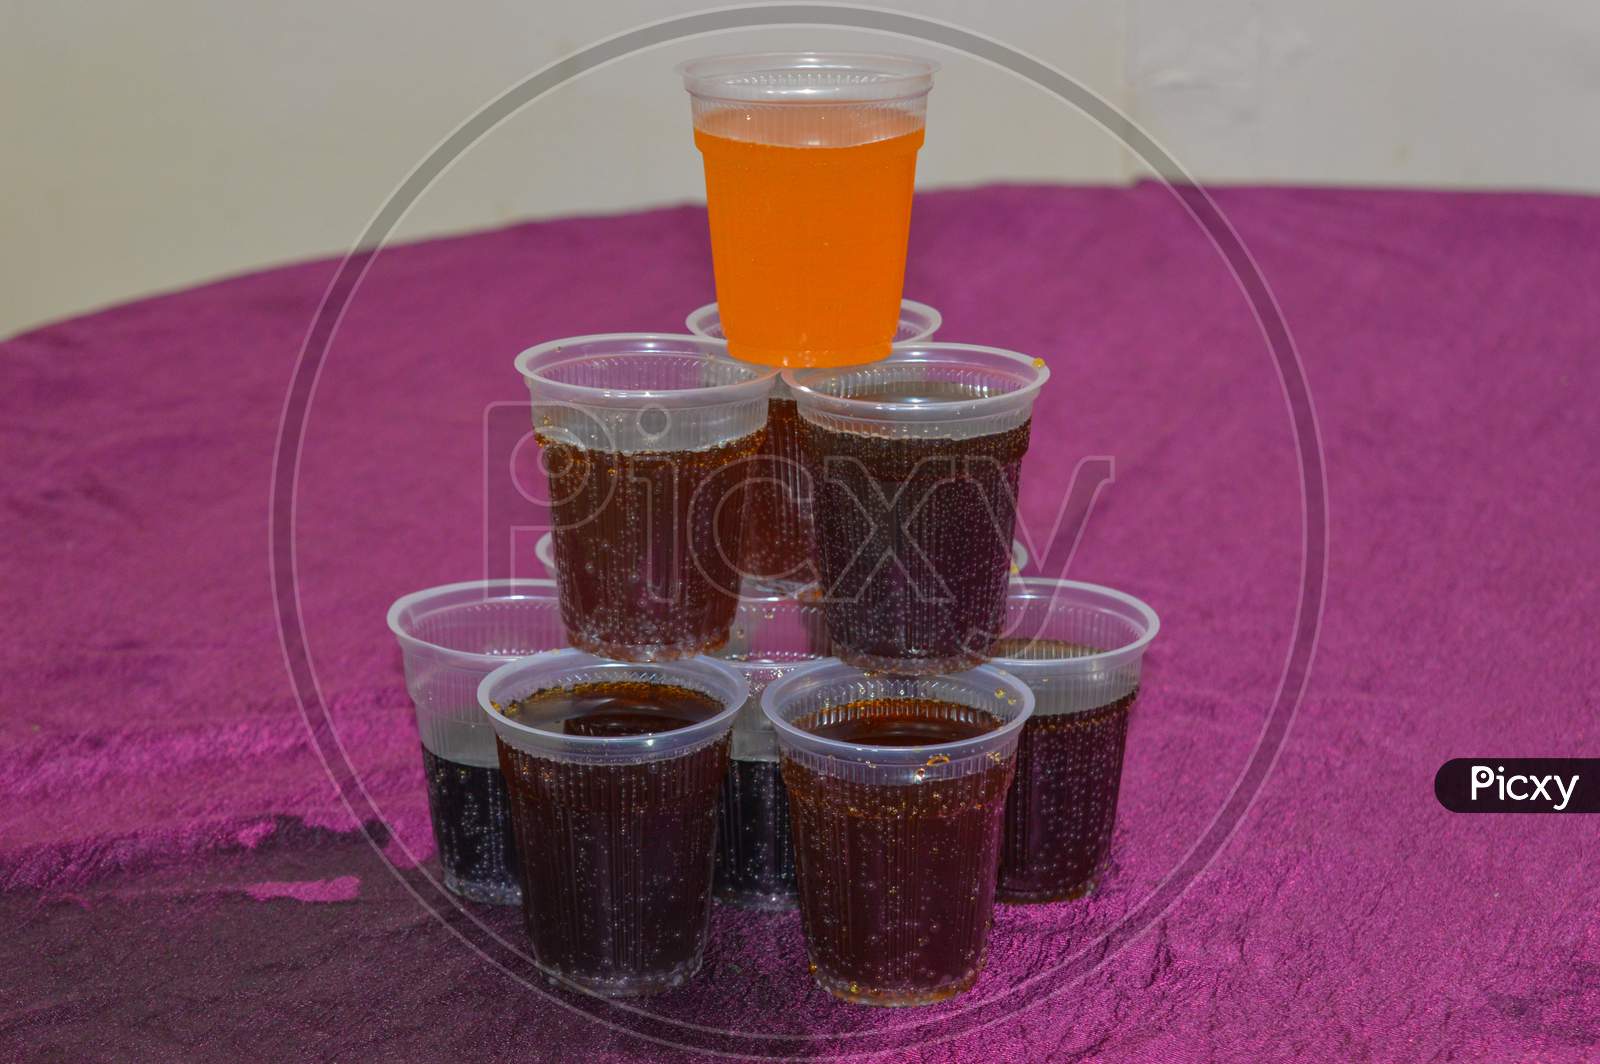 A Pyramid Of Cold Drink In Plastic Glasses Isolated On Purple Table.